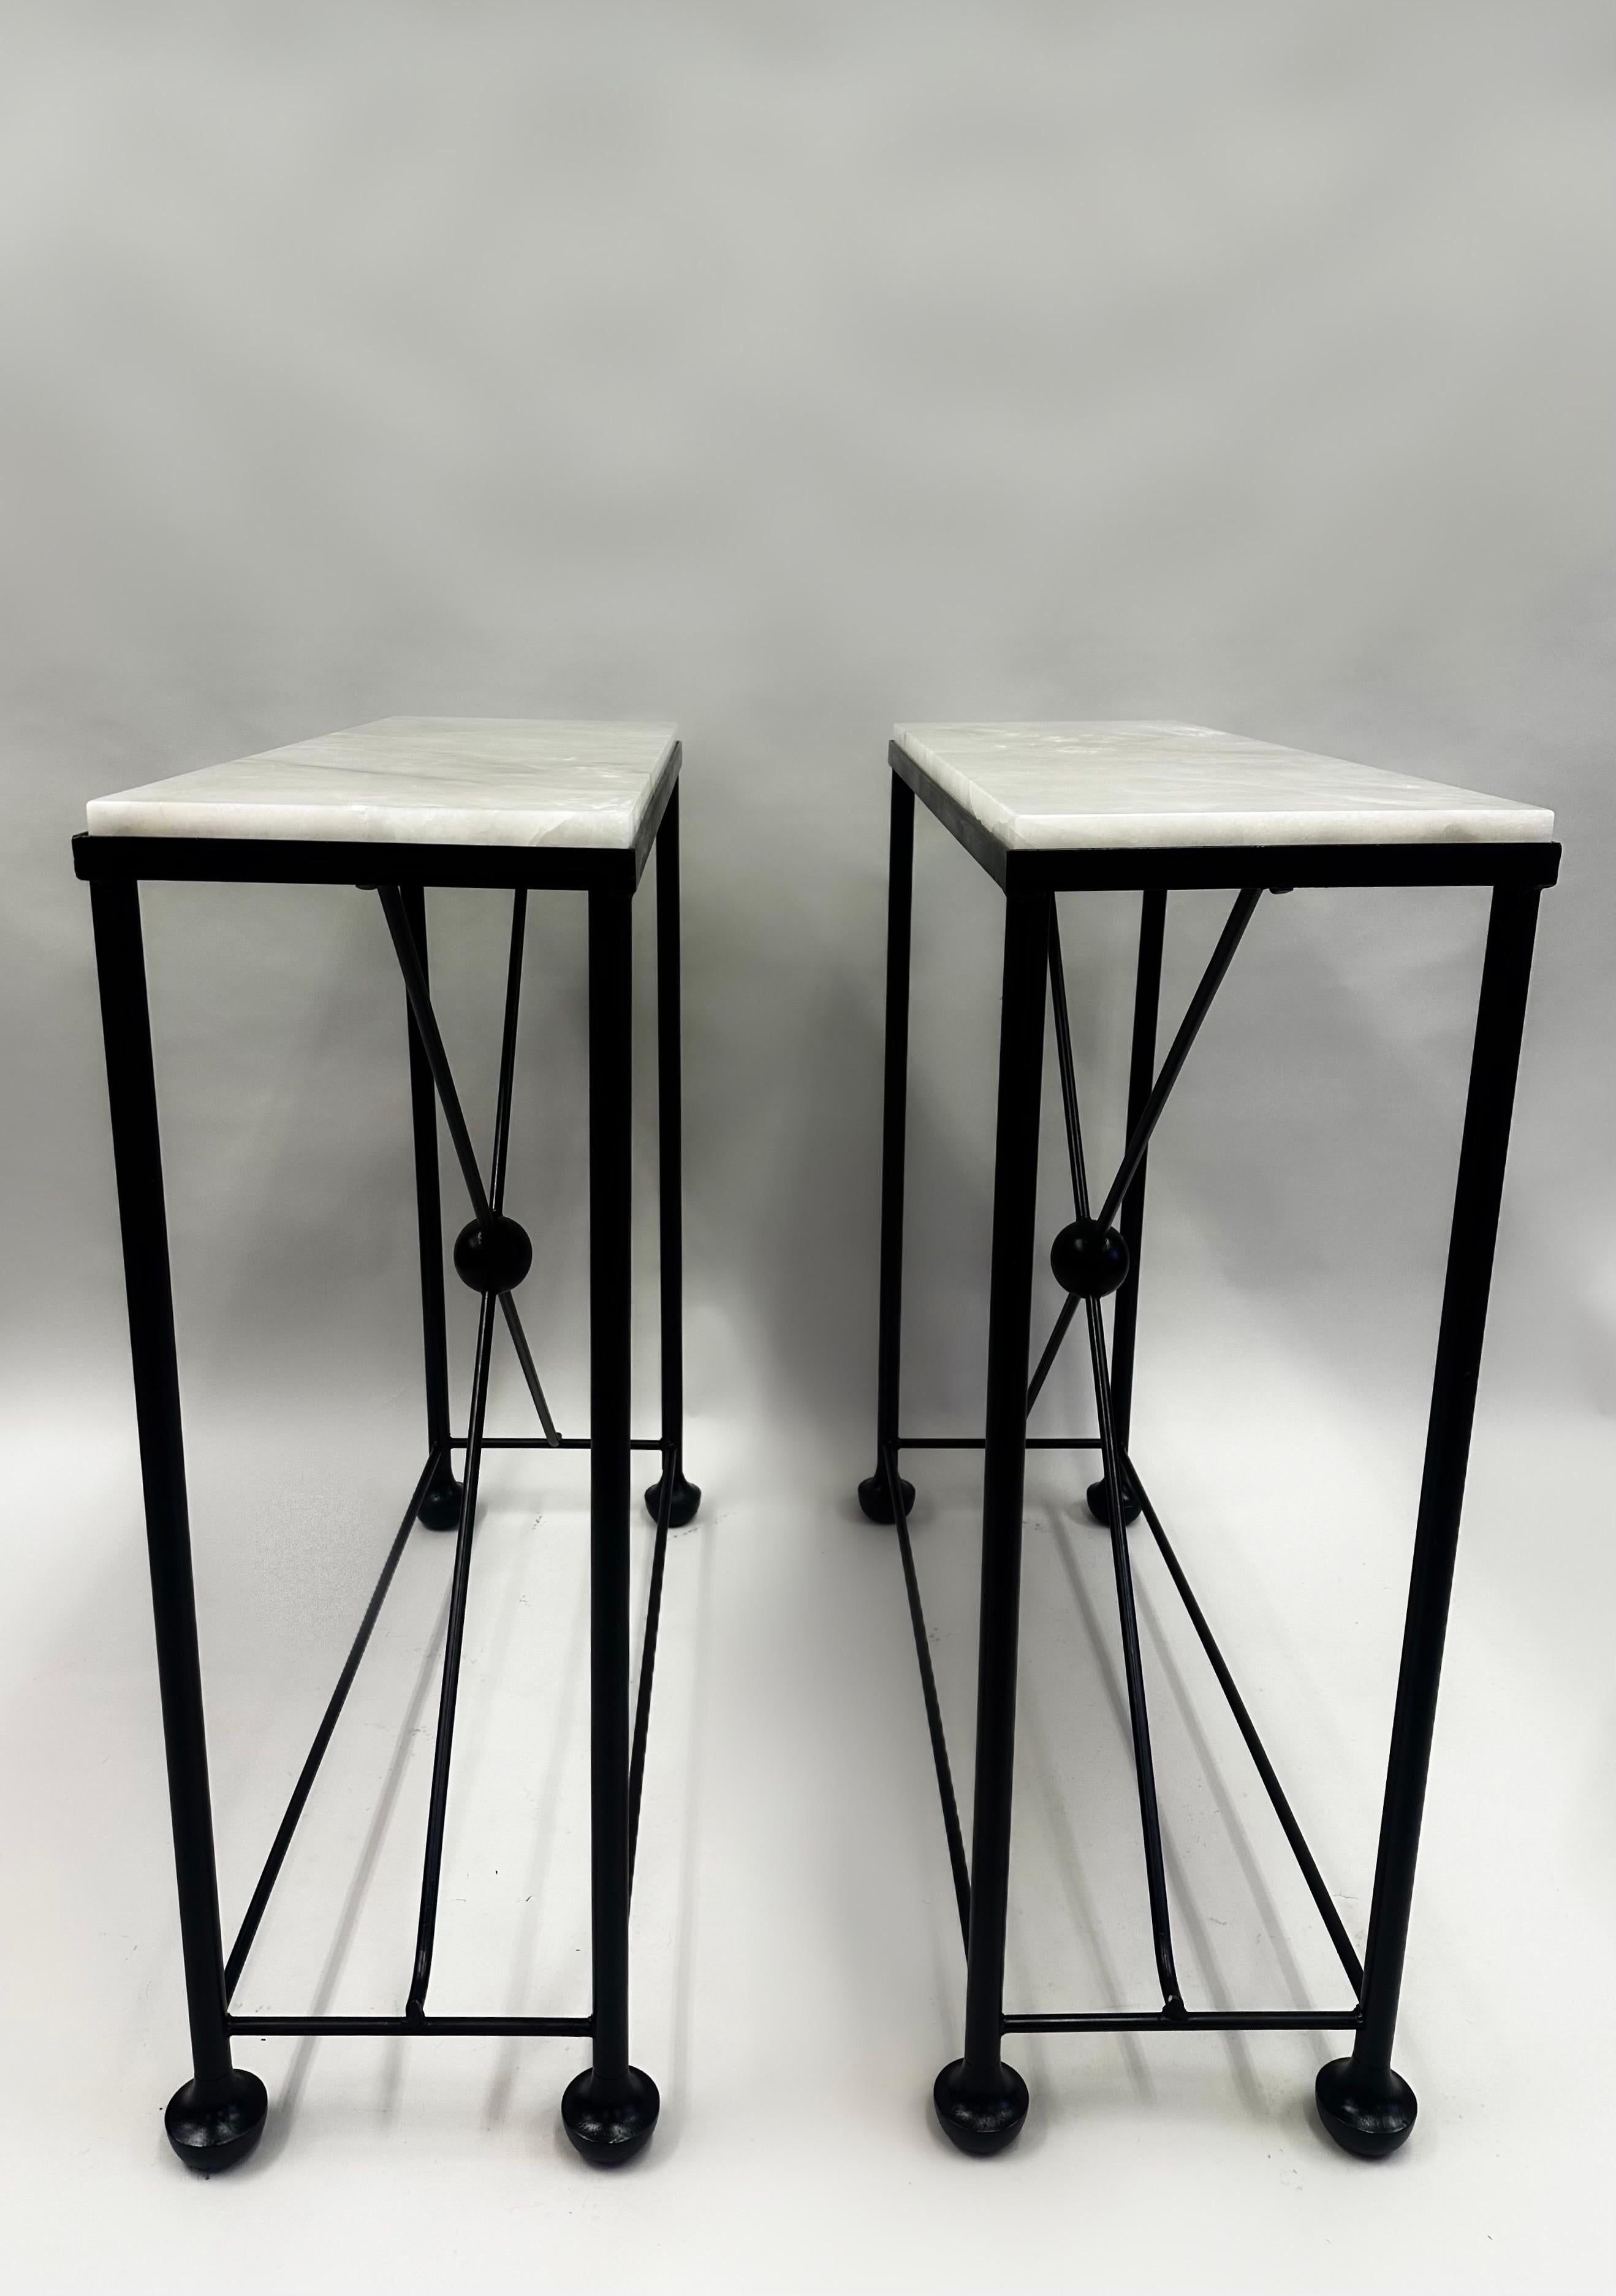 2 French Modern Neoclassical Rock Crystal & Iron Consoles, Jean-Michel Frank In Good Condition For Sale In New York, NY